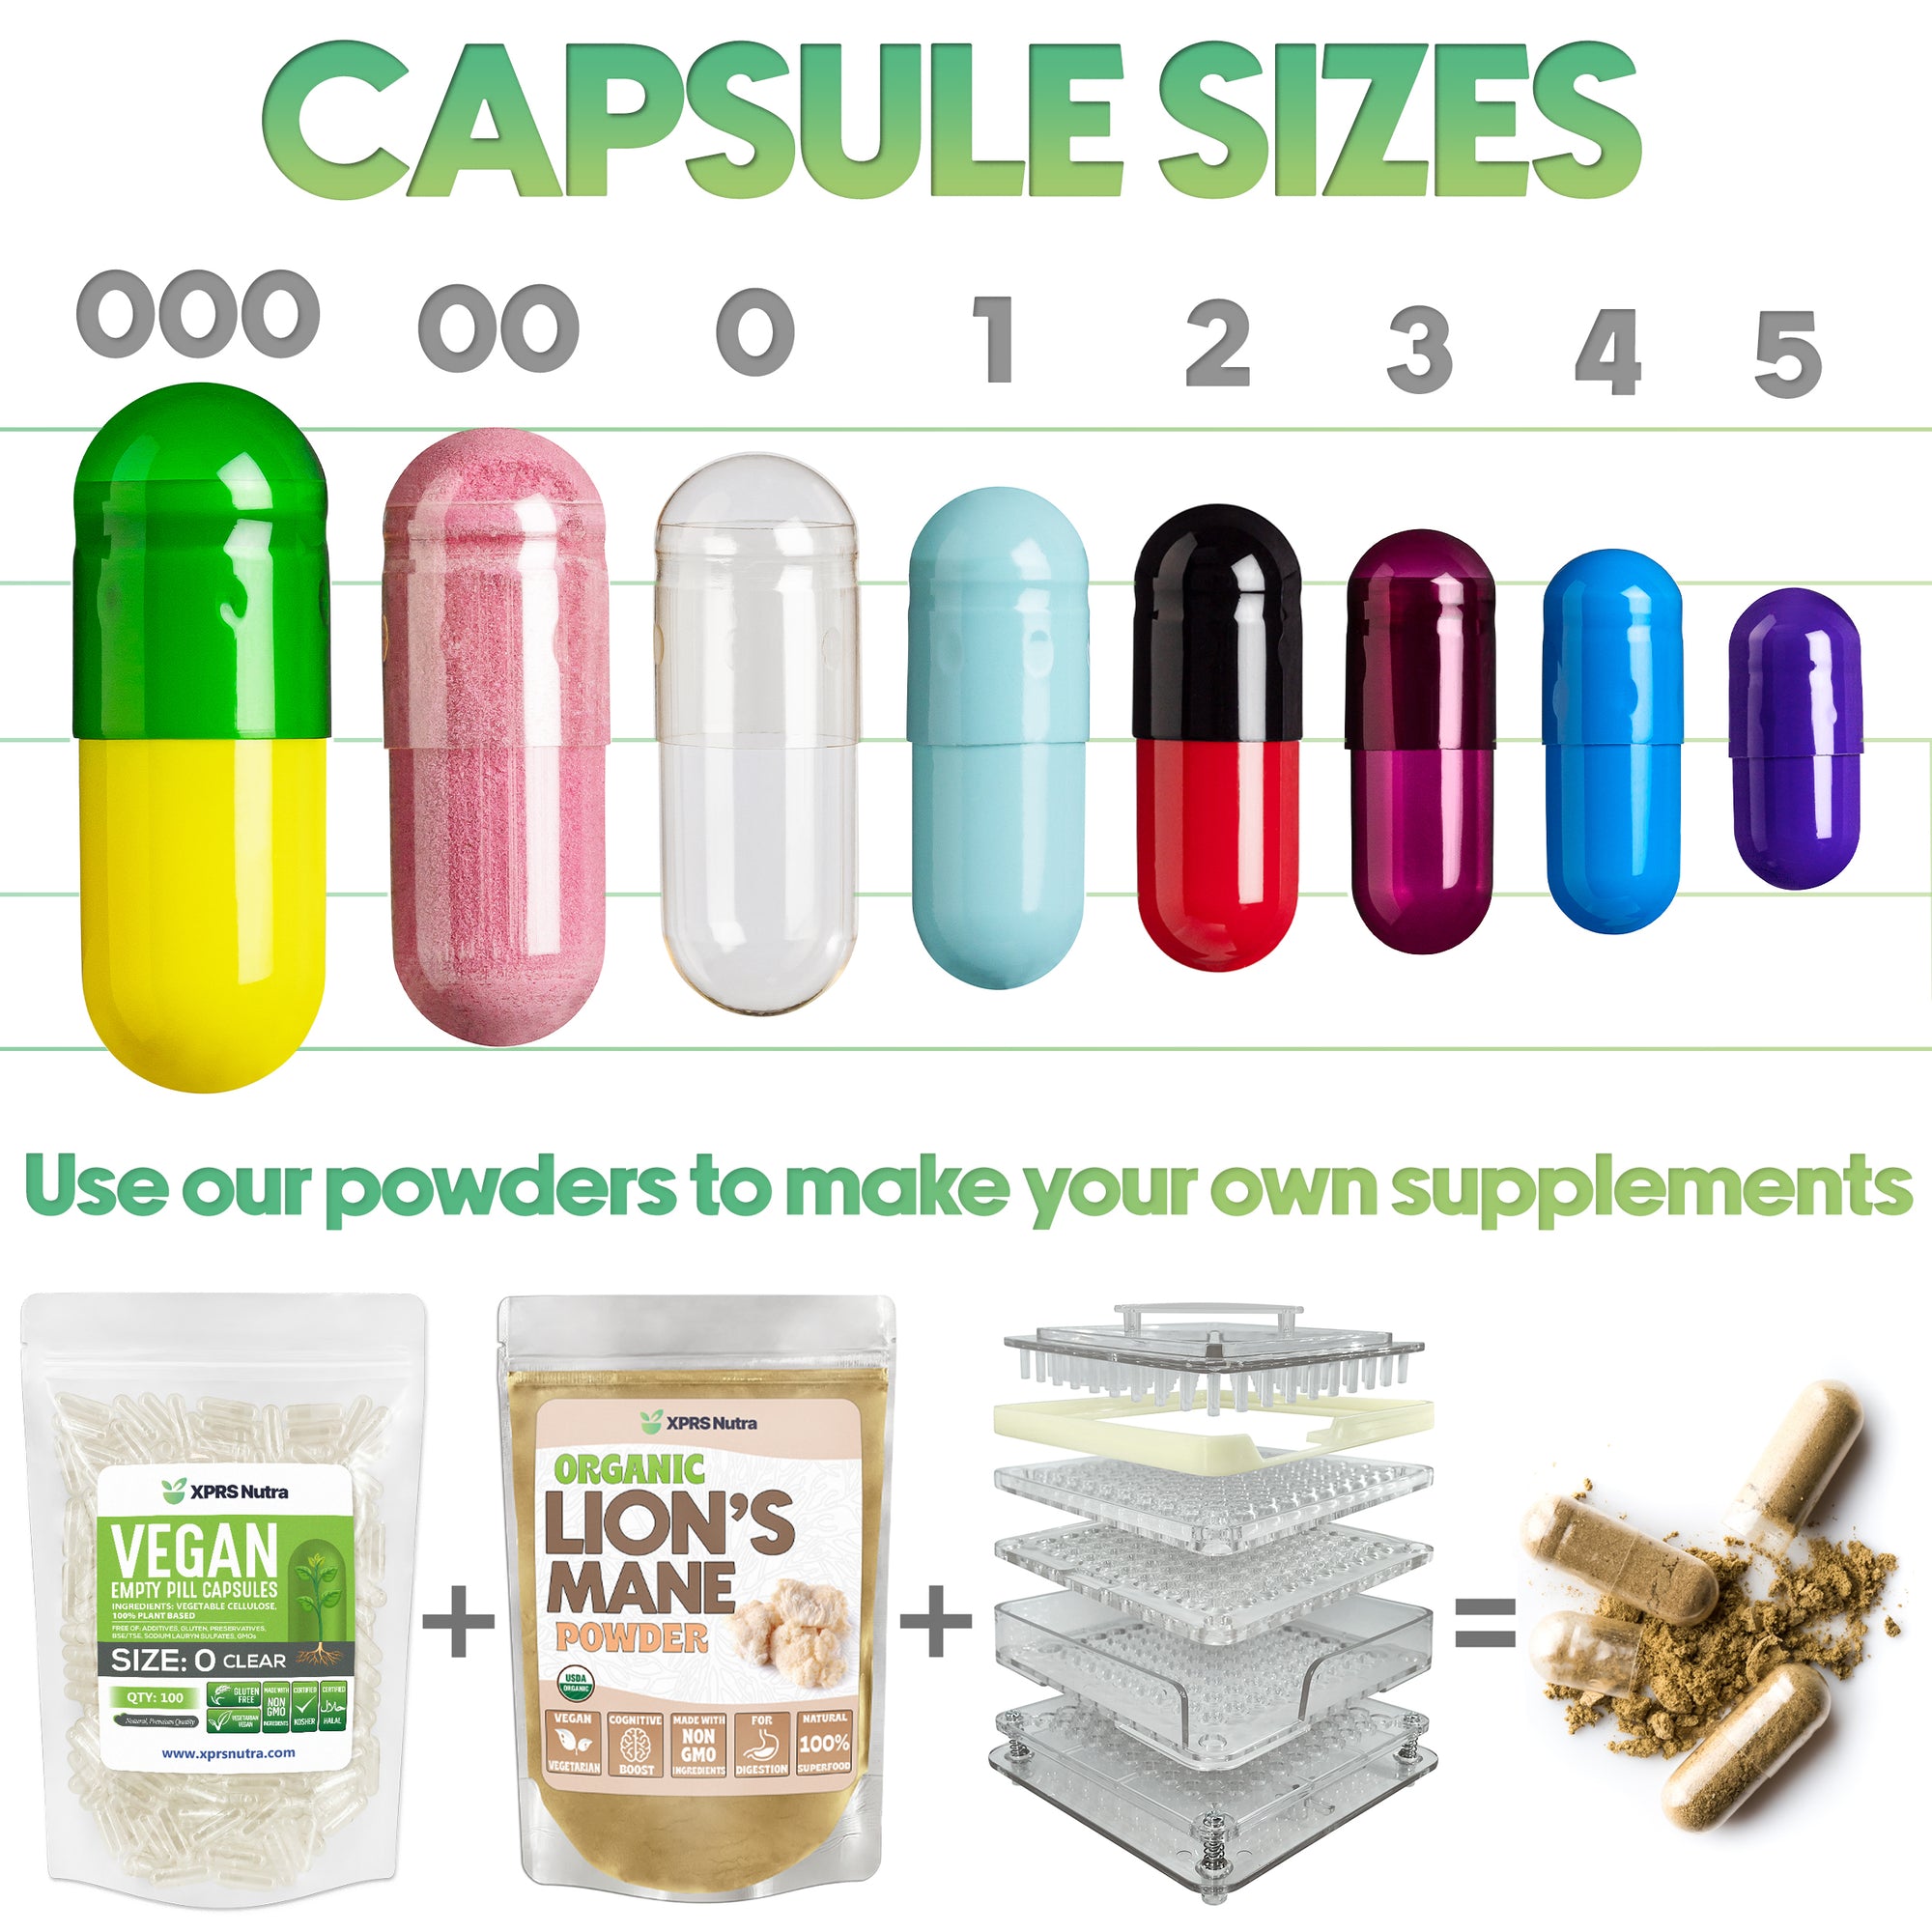 Size 2 Clear Empty Vegan Capsules for Essential Oils